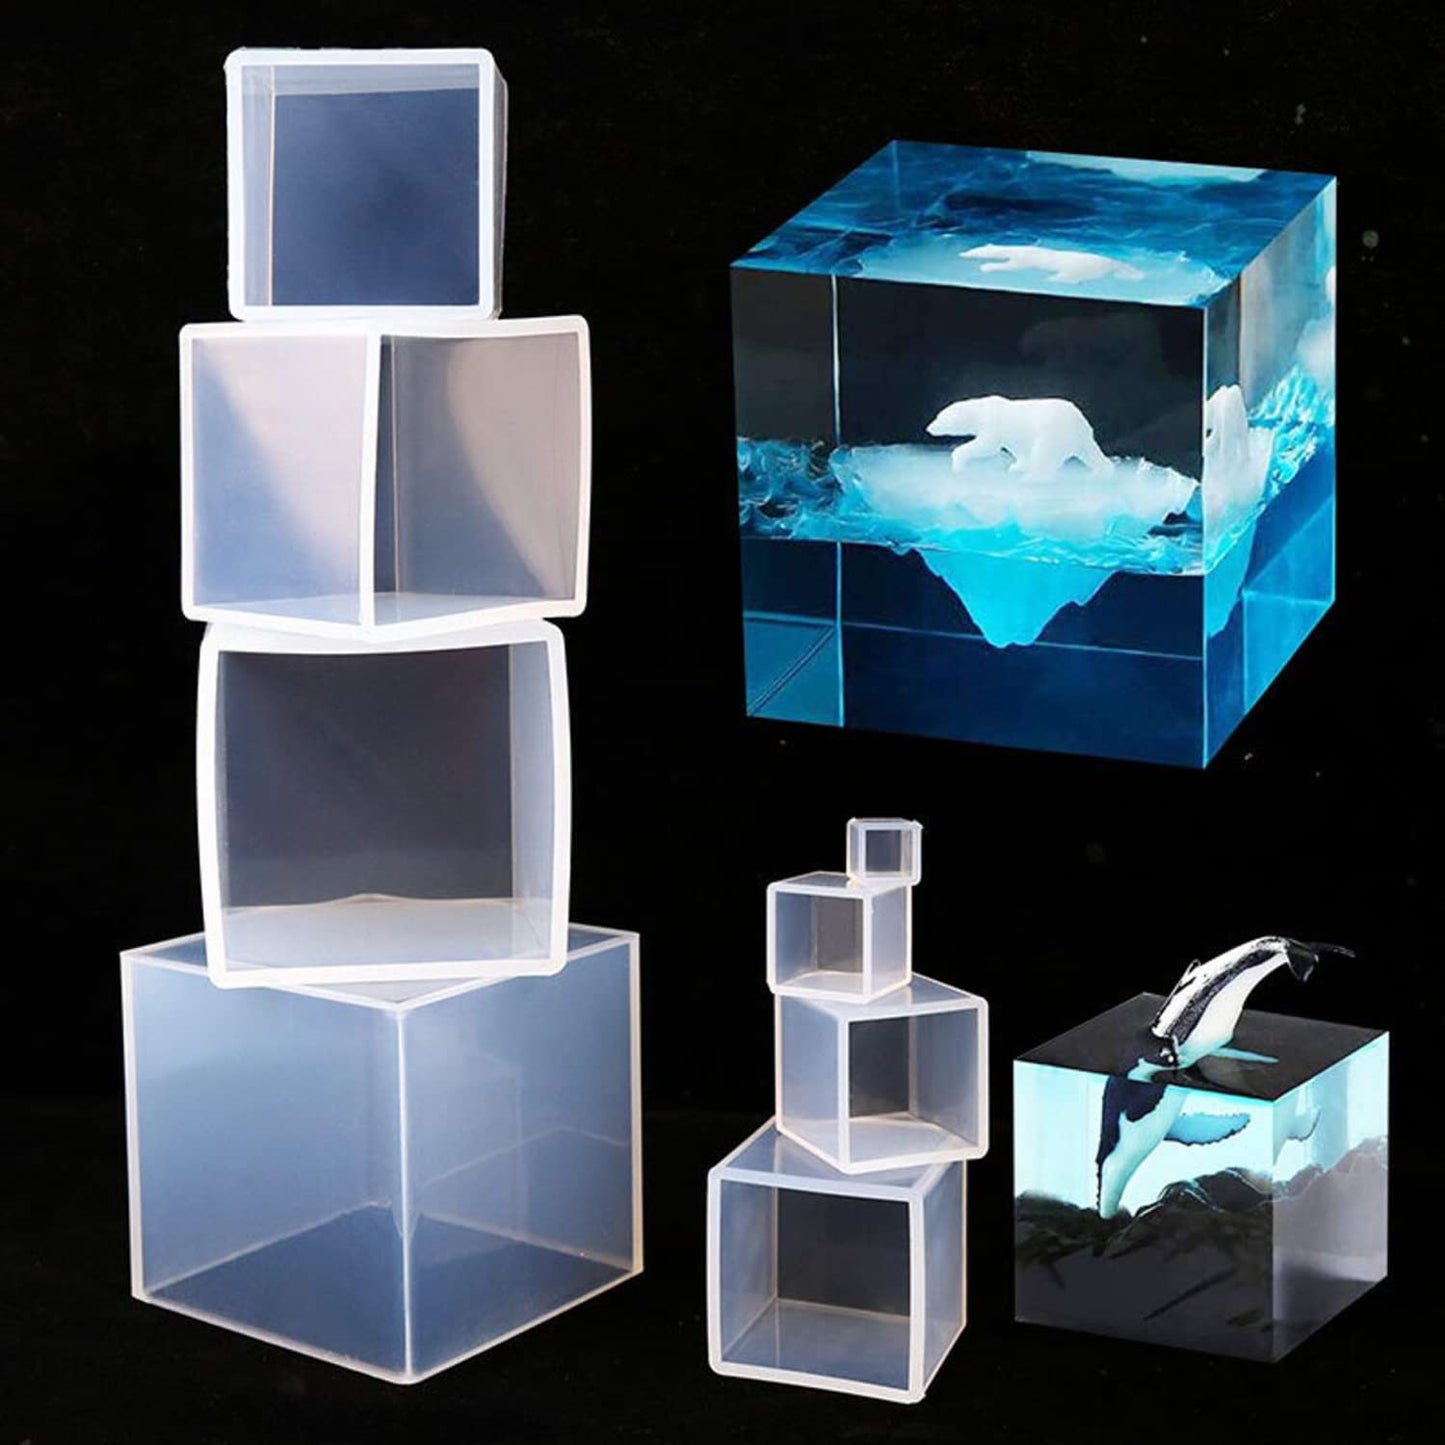 RESINWORLD Set of 4", 3", 2", 1.5", 1", 0.5" Clear Silicone Cube Molds, Large Deep Square Epoxy Resin Mold, Transparent Cube Silicone Molds for Resin Casting